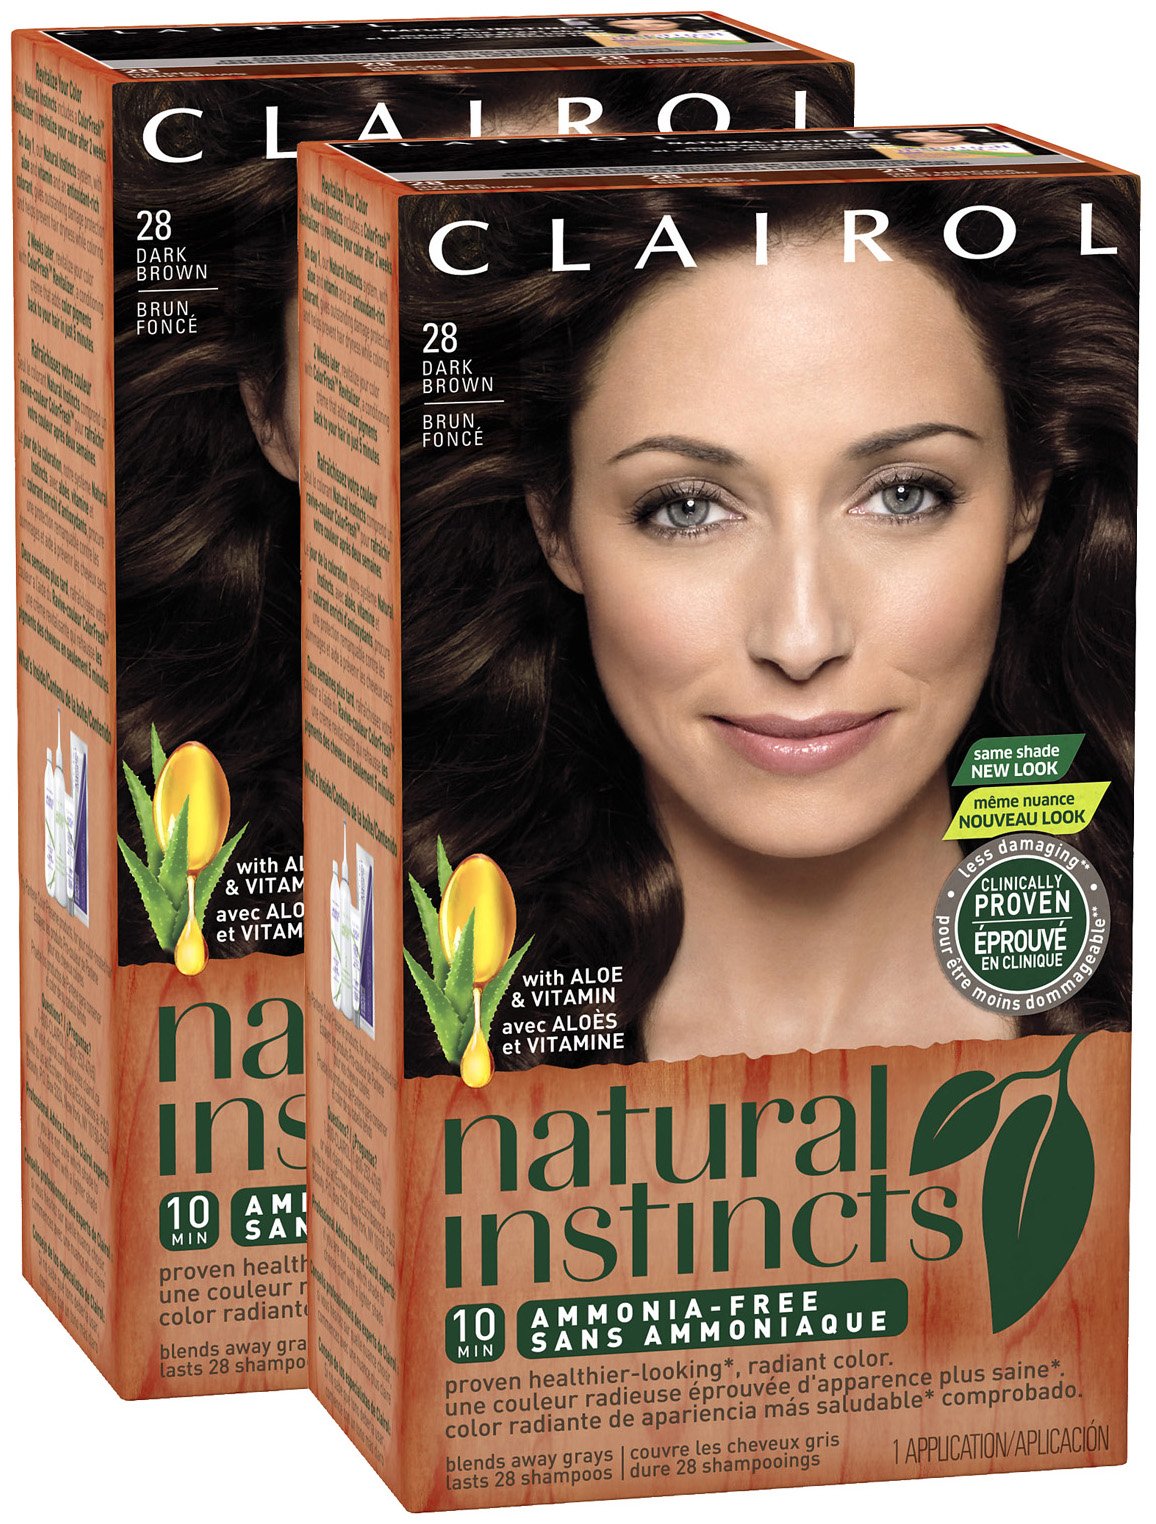 new-save-2-00-off-clairol-natural-instincts-hair-dye-coupon-free